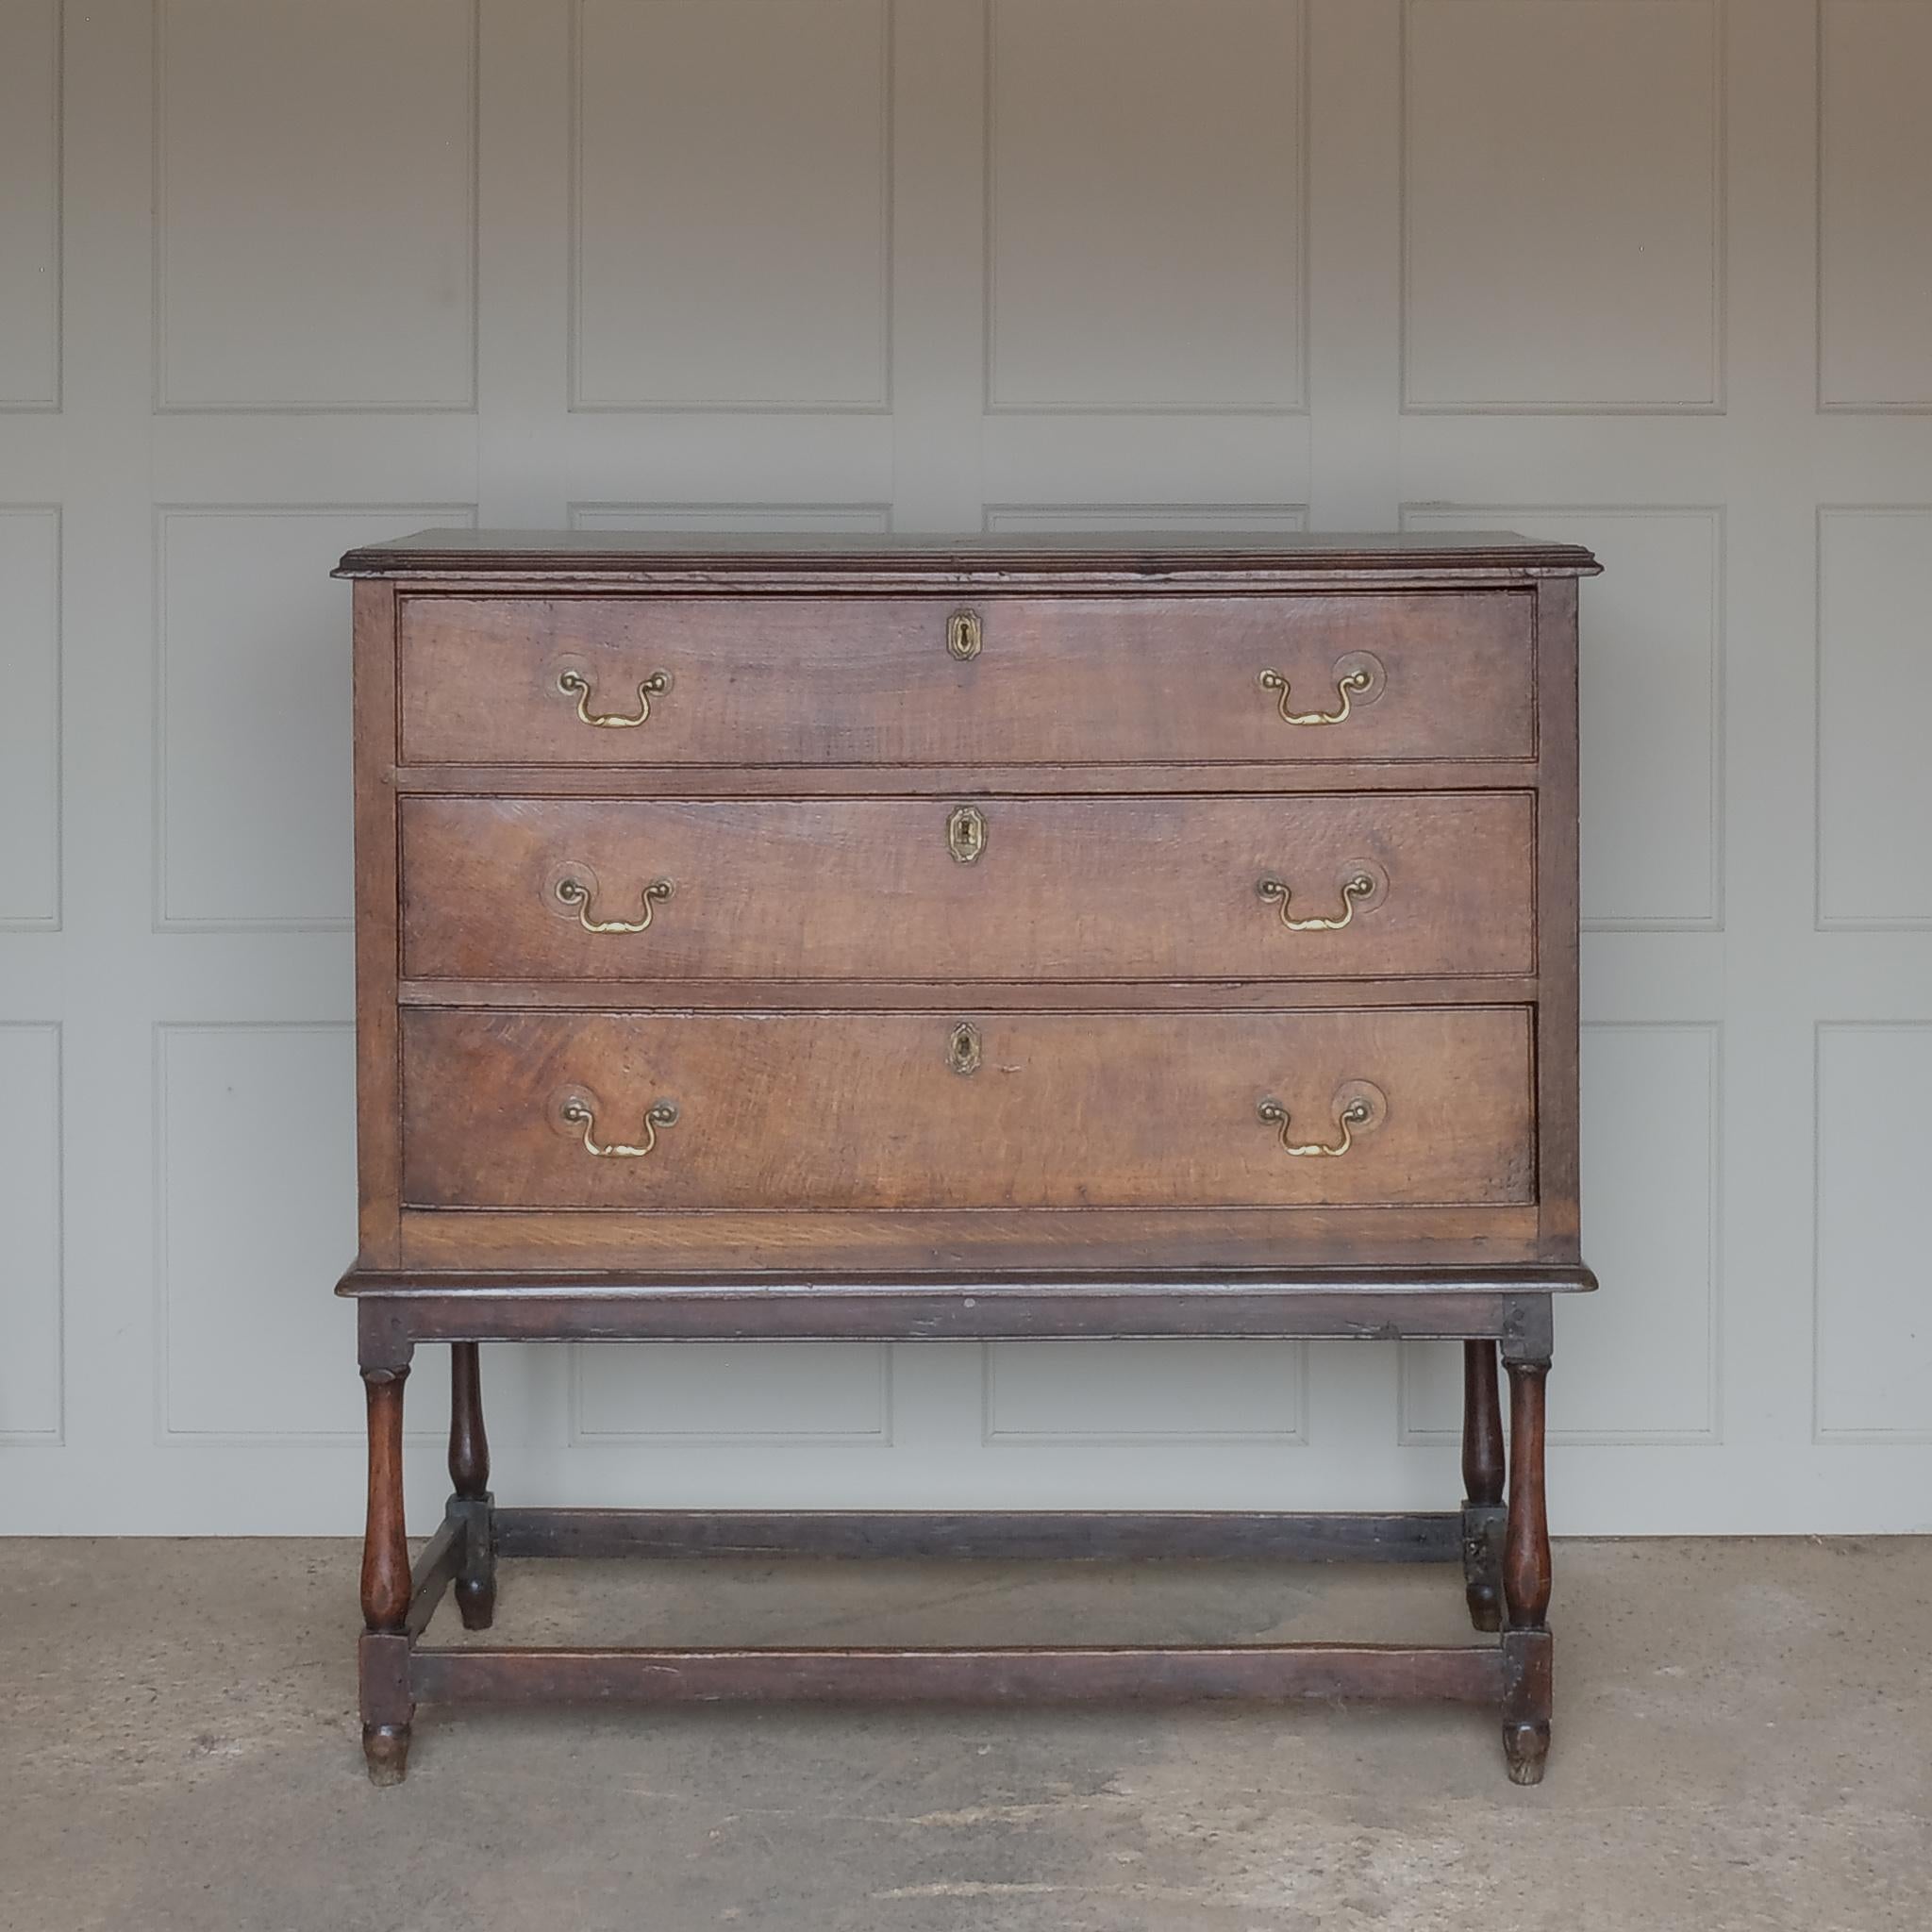 An oak chest on legs, 18th century, comprising three long drawers with brass drop handles and platework on turned legs with rectangular stretchers at the base. In very good condition throughout, a wonderful rich patina. 